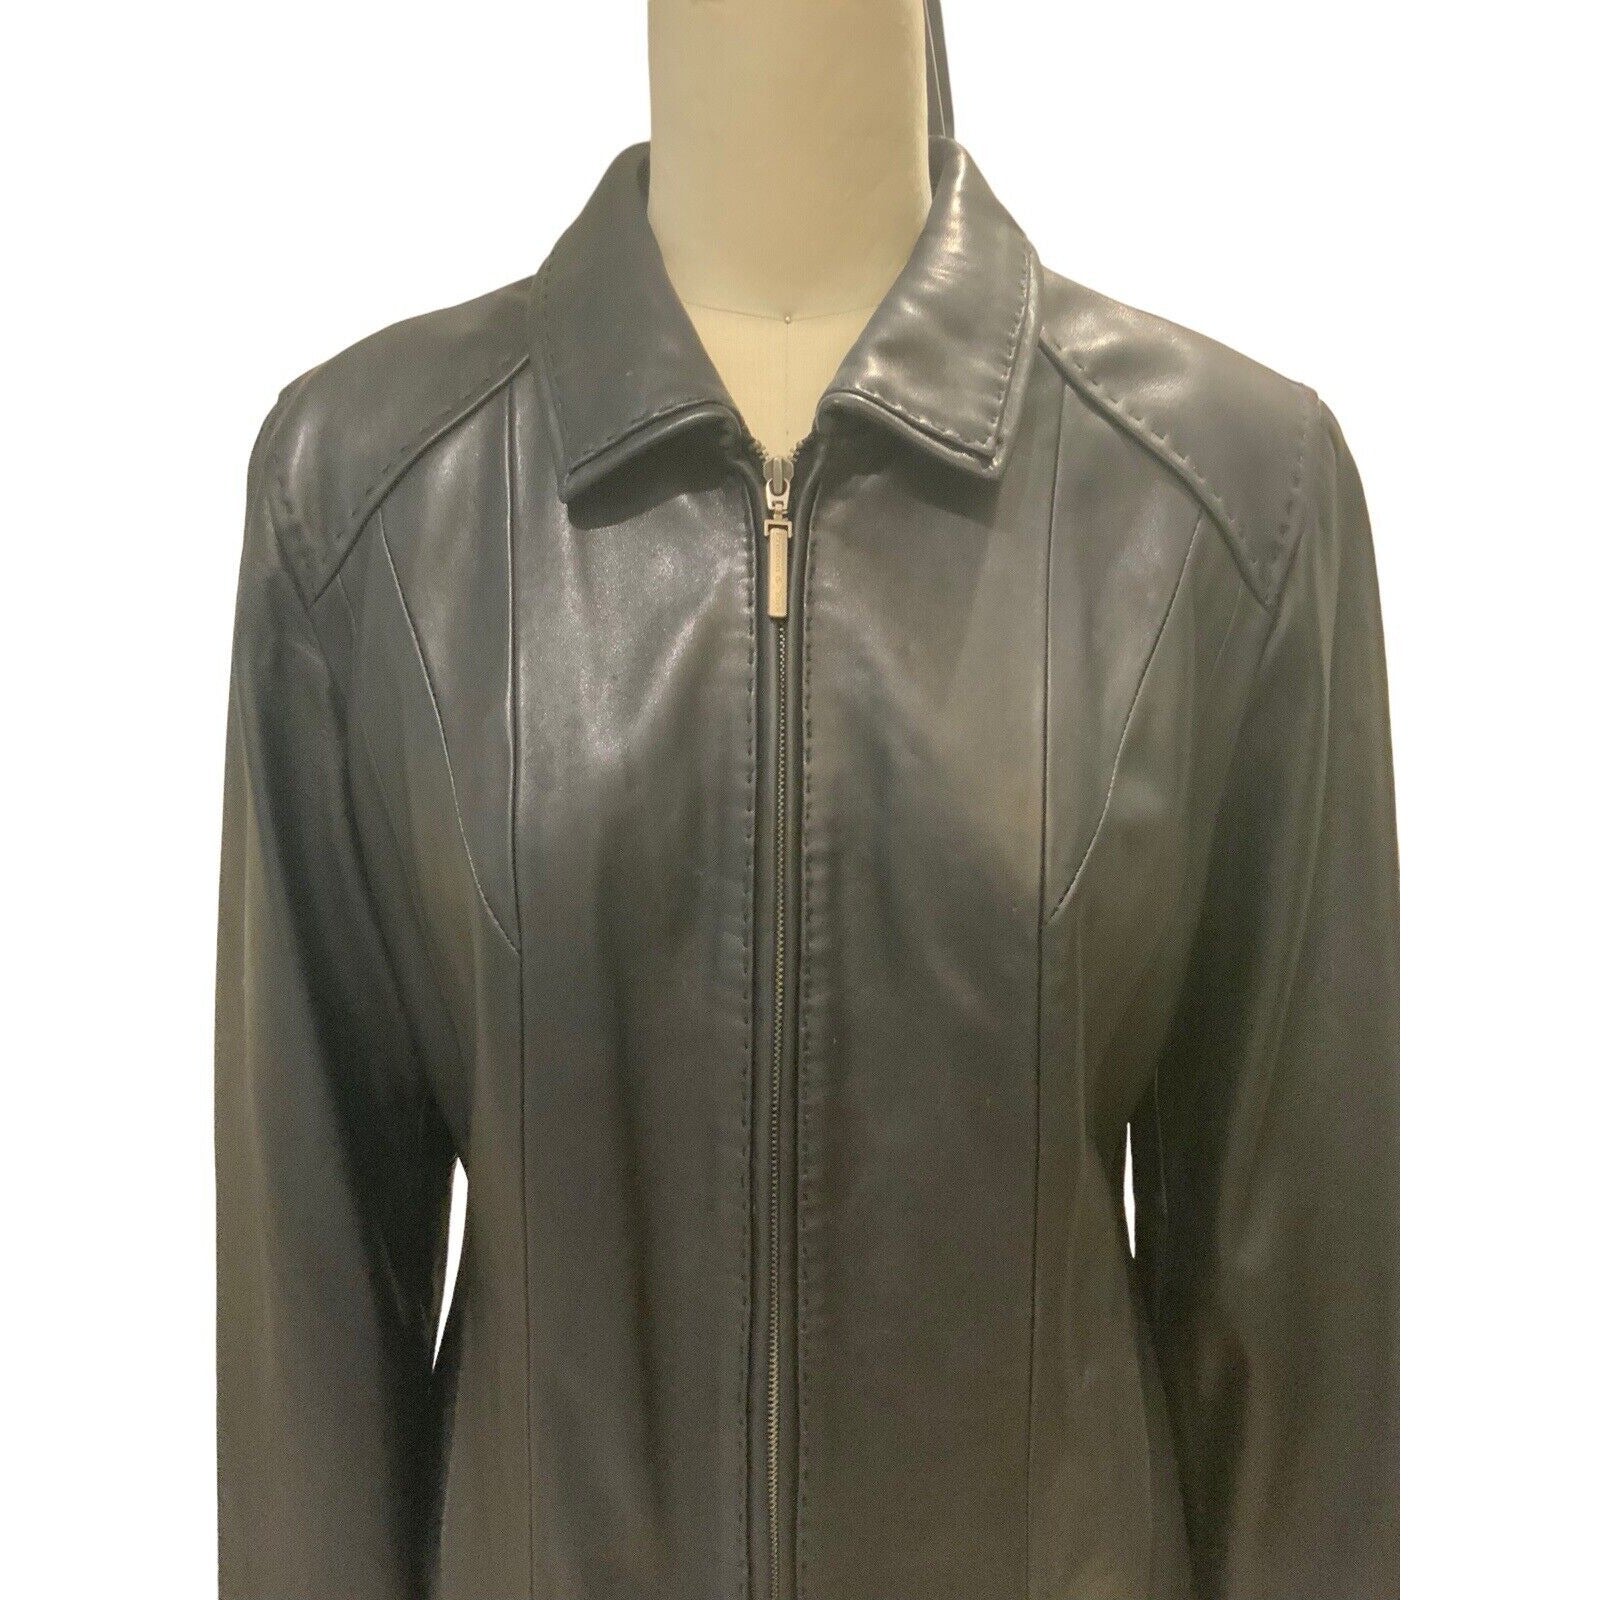 Closeup Of Front View Of Women's Leather Jacket